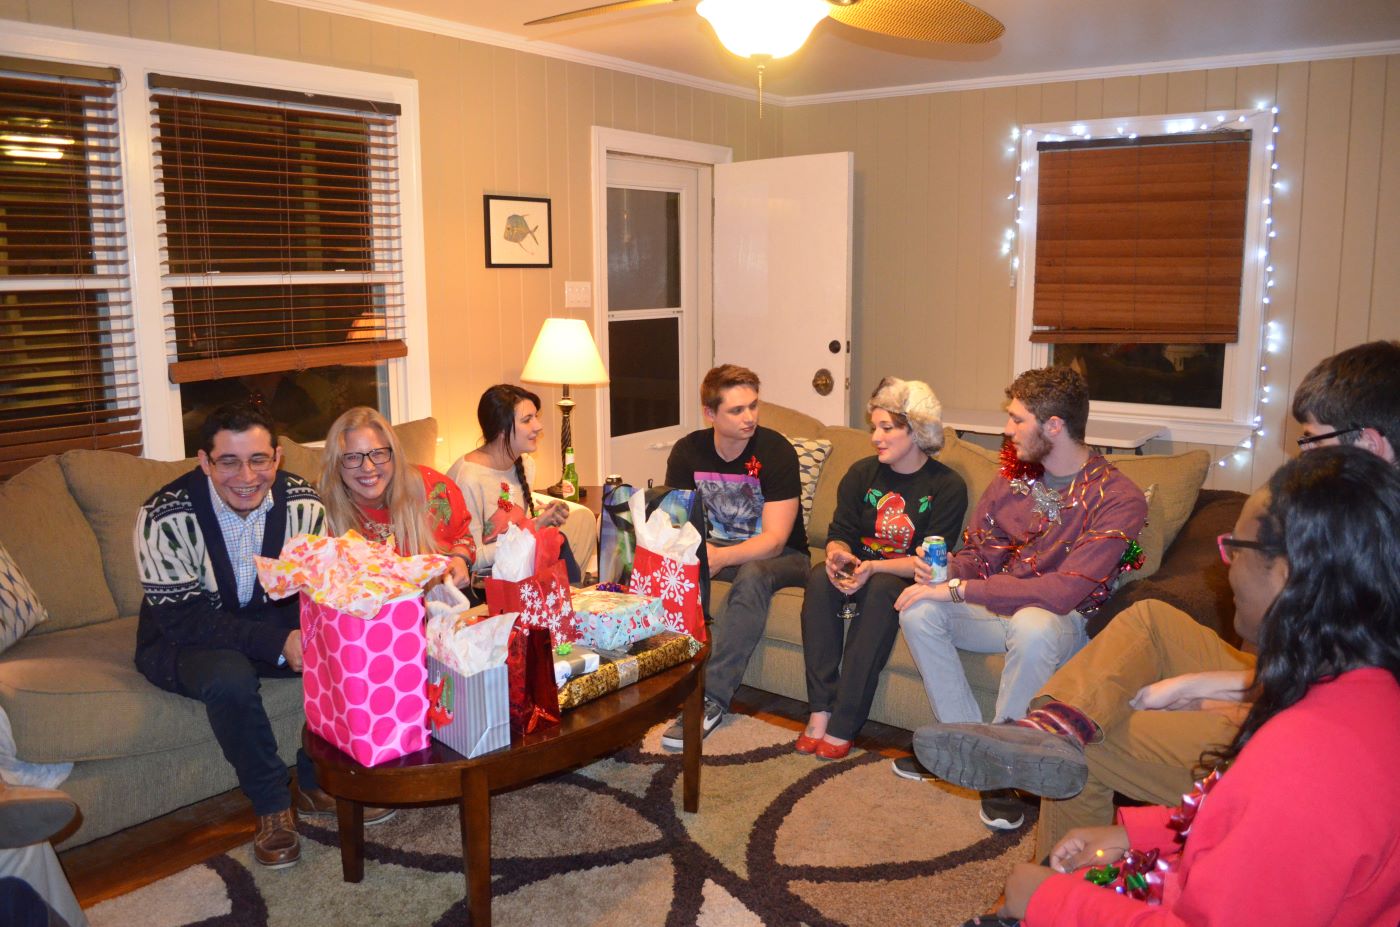 maruska lab holiday party group pic on the couch